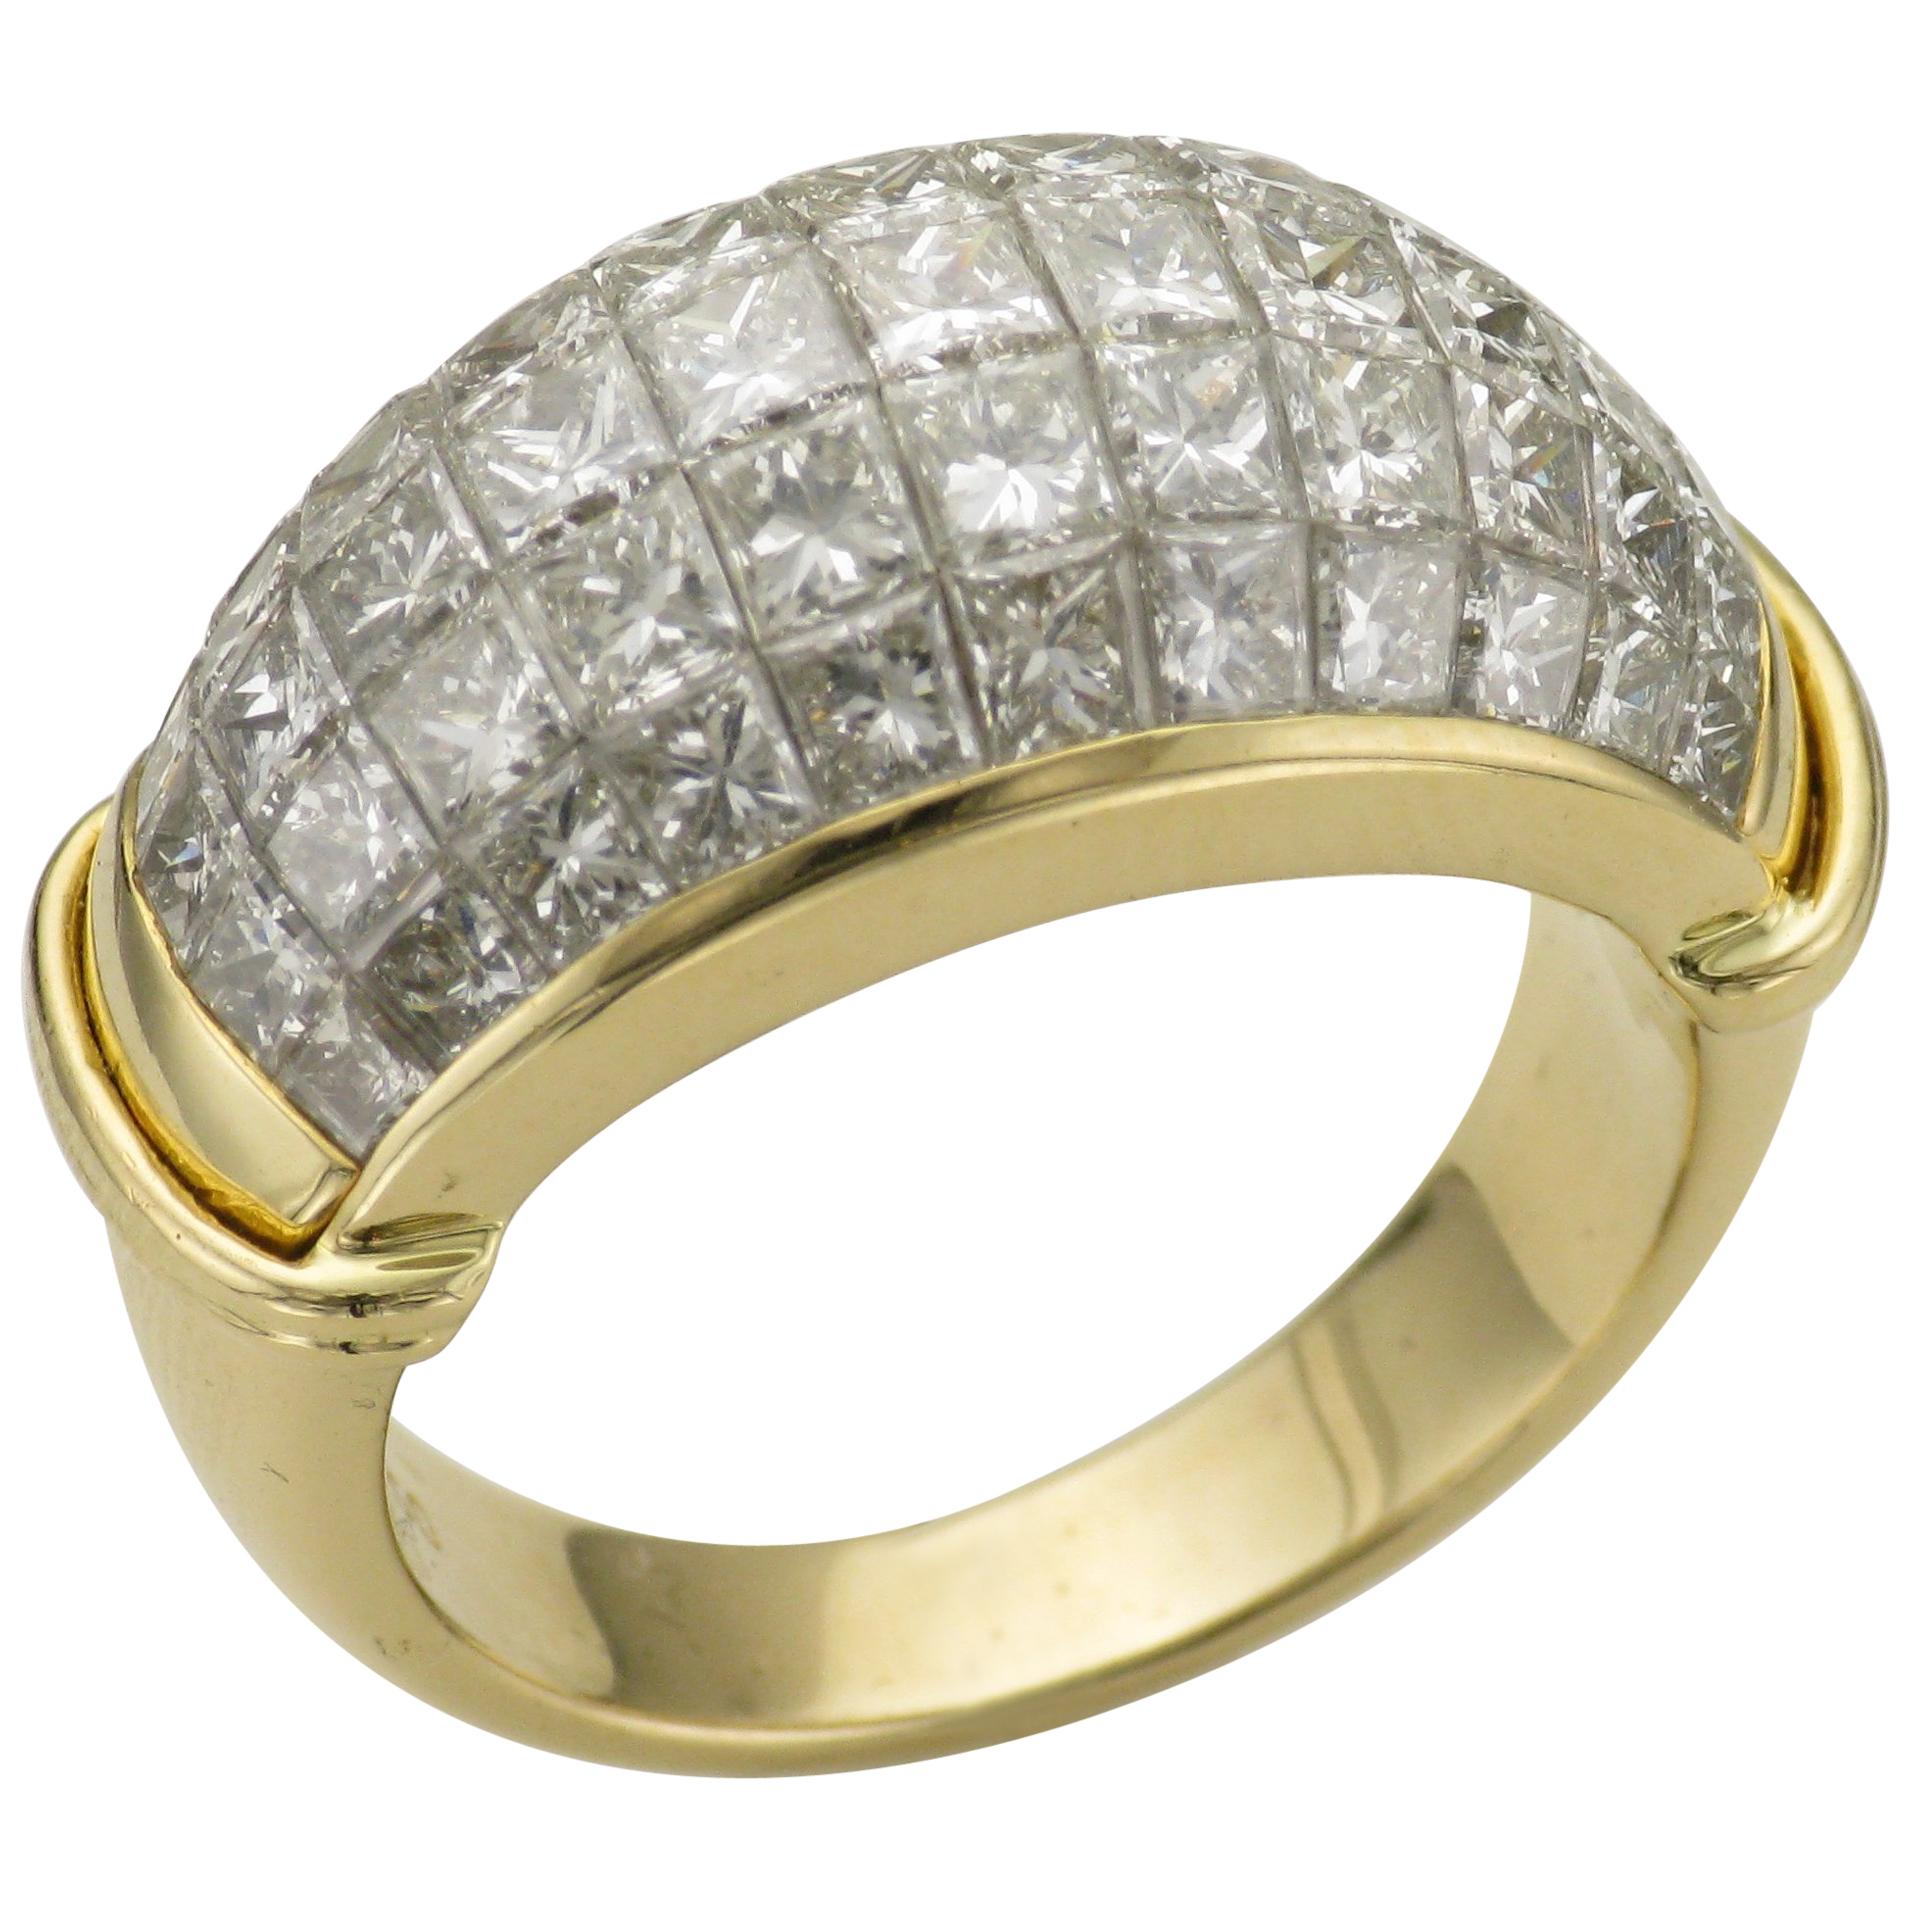 Princess Cut Diamonds Serti Mysterieux Yellow Gold Pave Band Dome Cocktail Ring